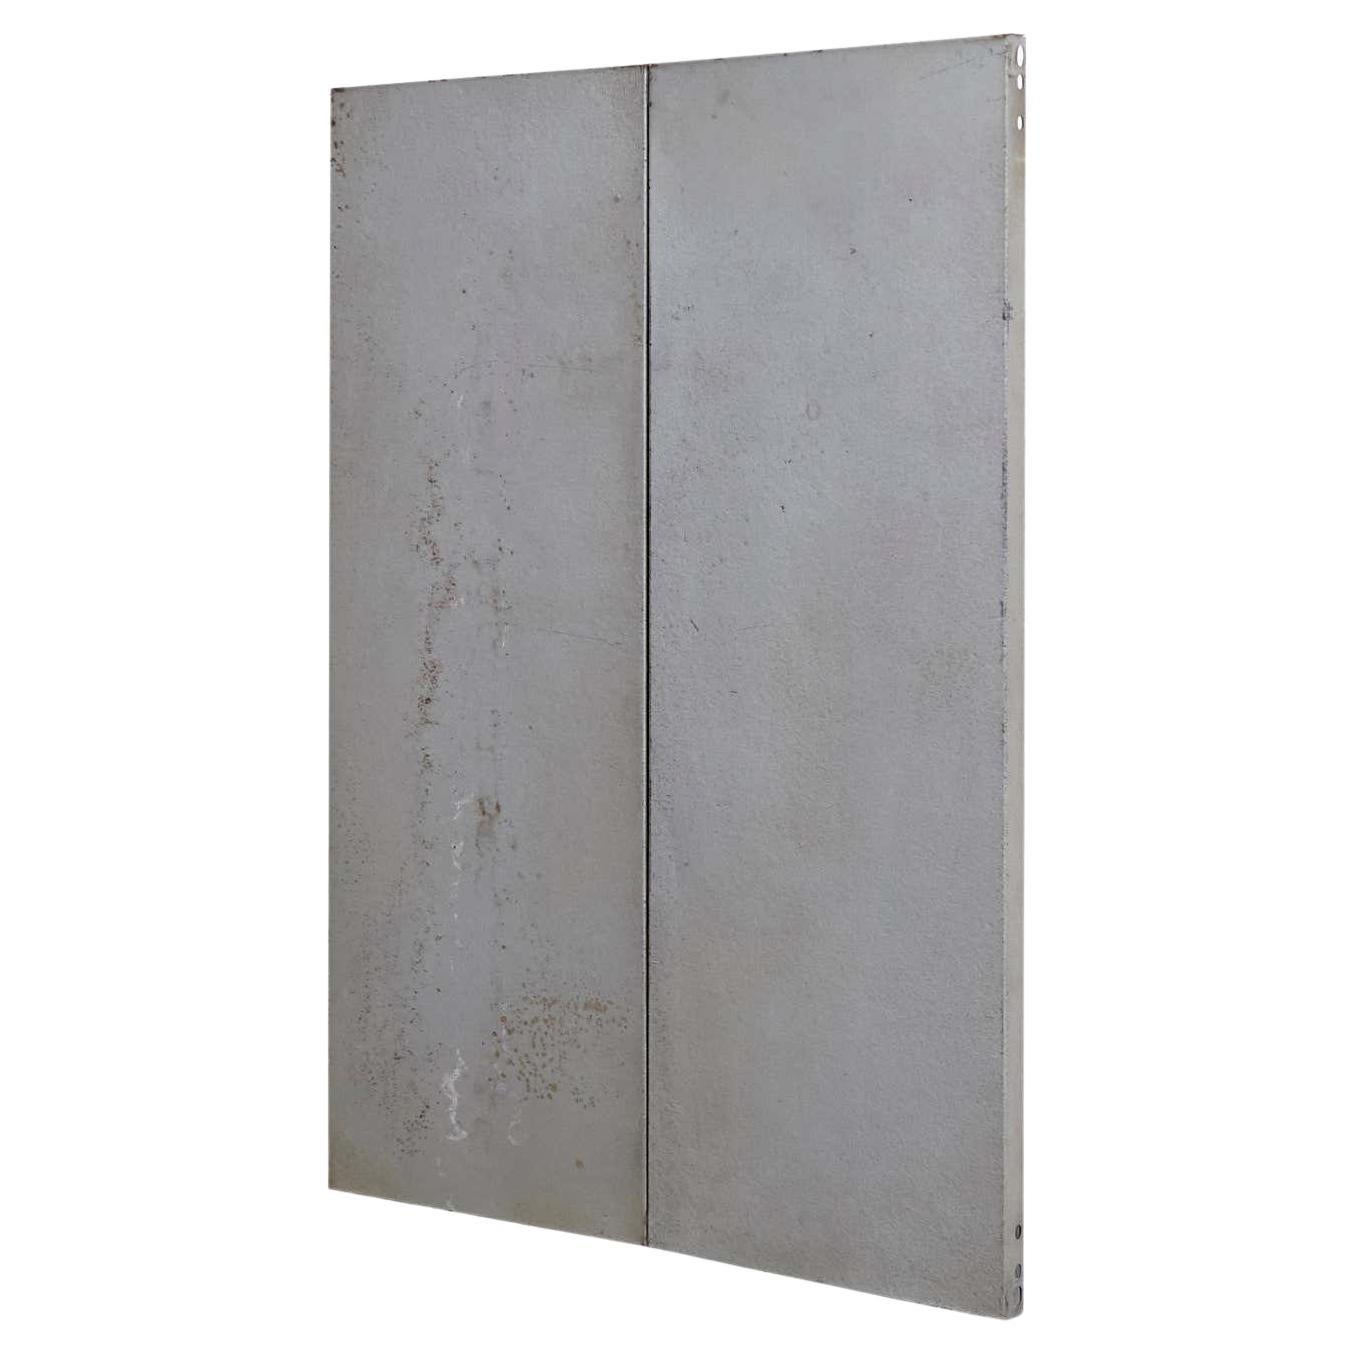 Ramon Horts Contemporary Metal Abstract Minimalist Artwork 1/2 N 003 For Sale